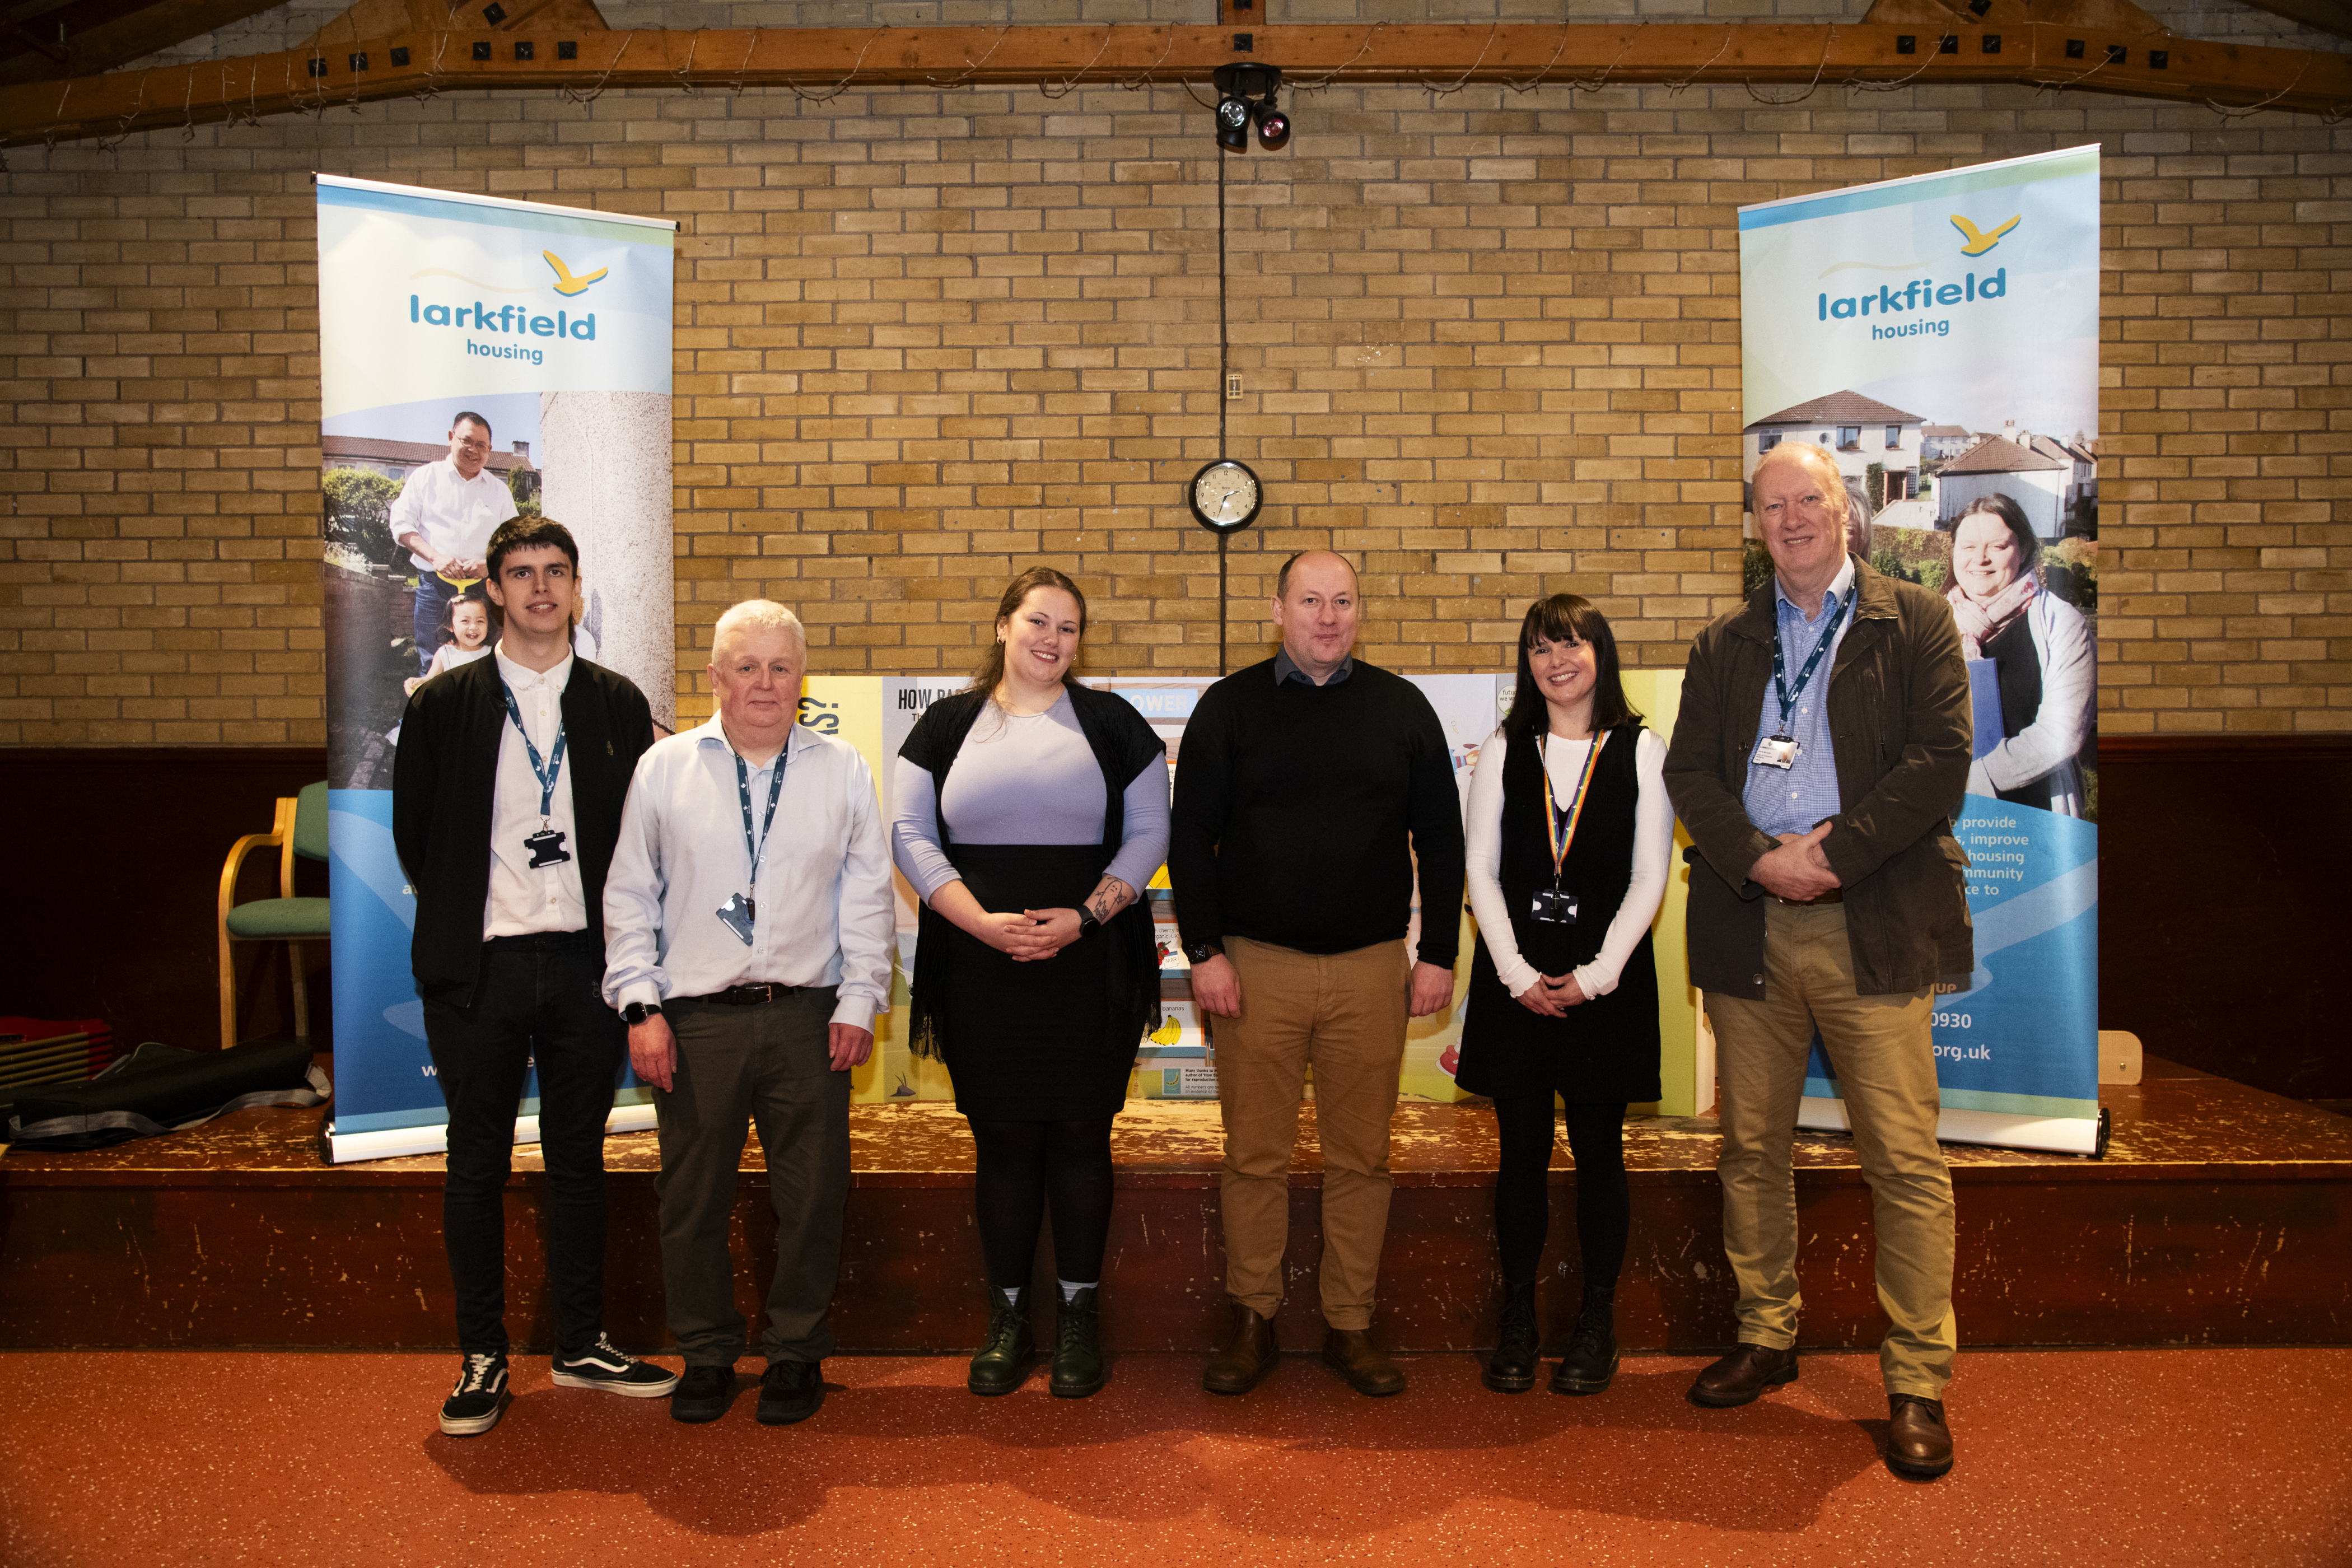 Link Group event conjures up conversation while helping isolation vanish in Greenock